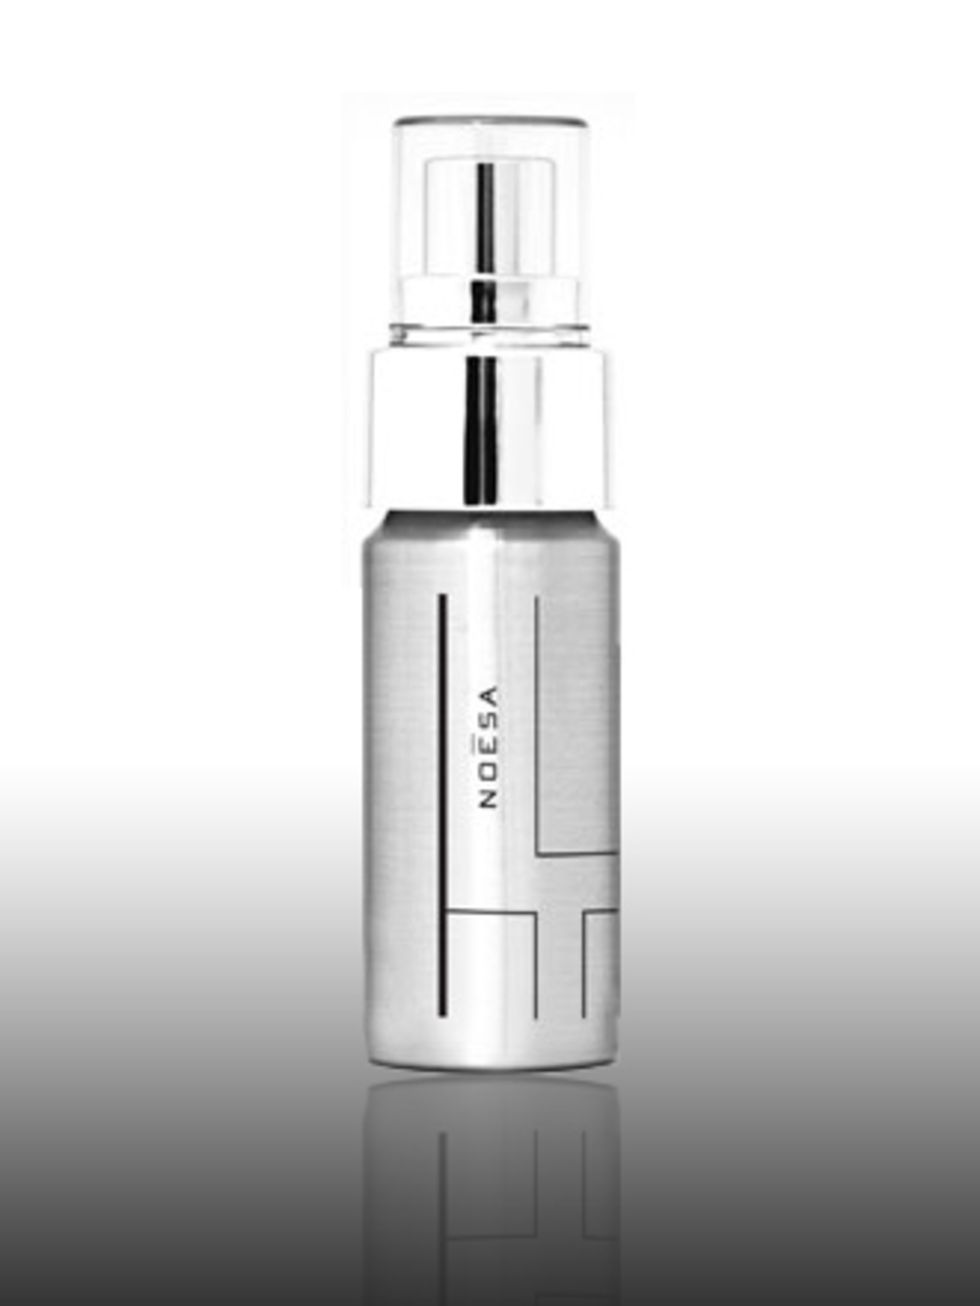 <p>Glow Booster Serum, £340 by Noesa at <a href="http://www.zuneta.com/">Zuneta</a> Noesa is an innovative new skincare brand which aims to encourage cell renewal in order to repair the structure of the skin. Founded by Gerd Gerken, Noesa uses their own i